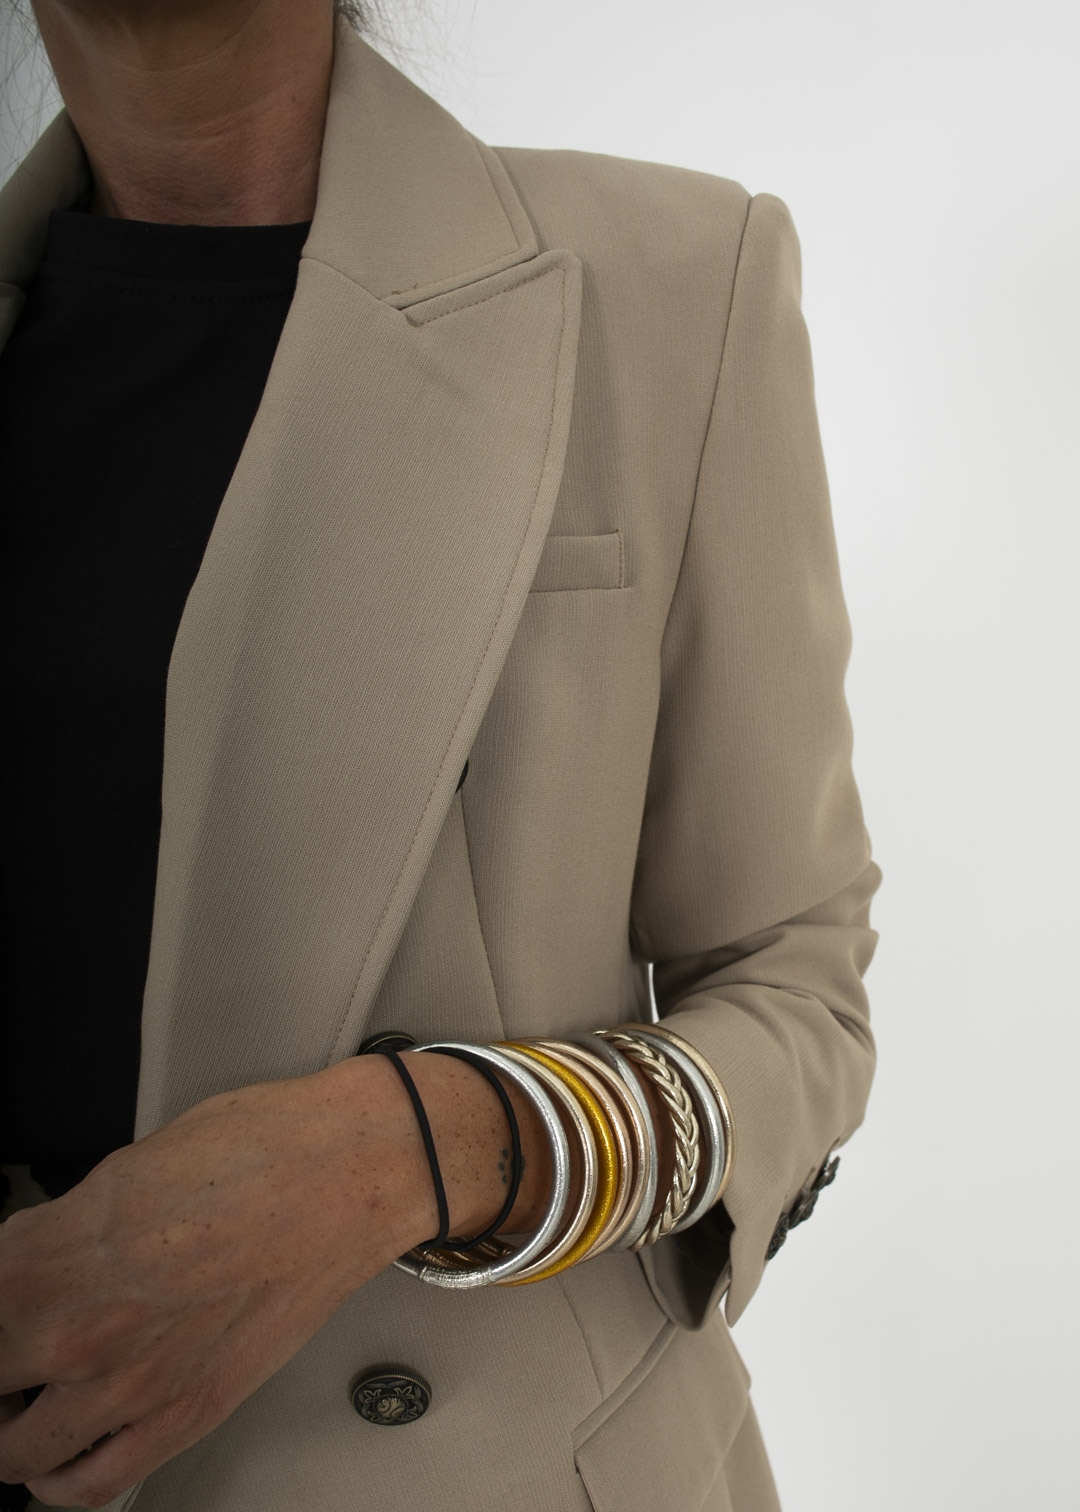 TAUPE BLAZER GOLD BUTTONS